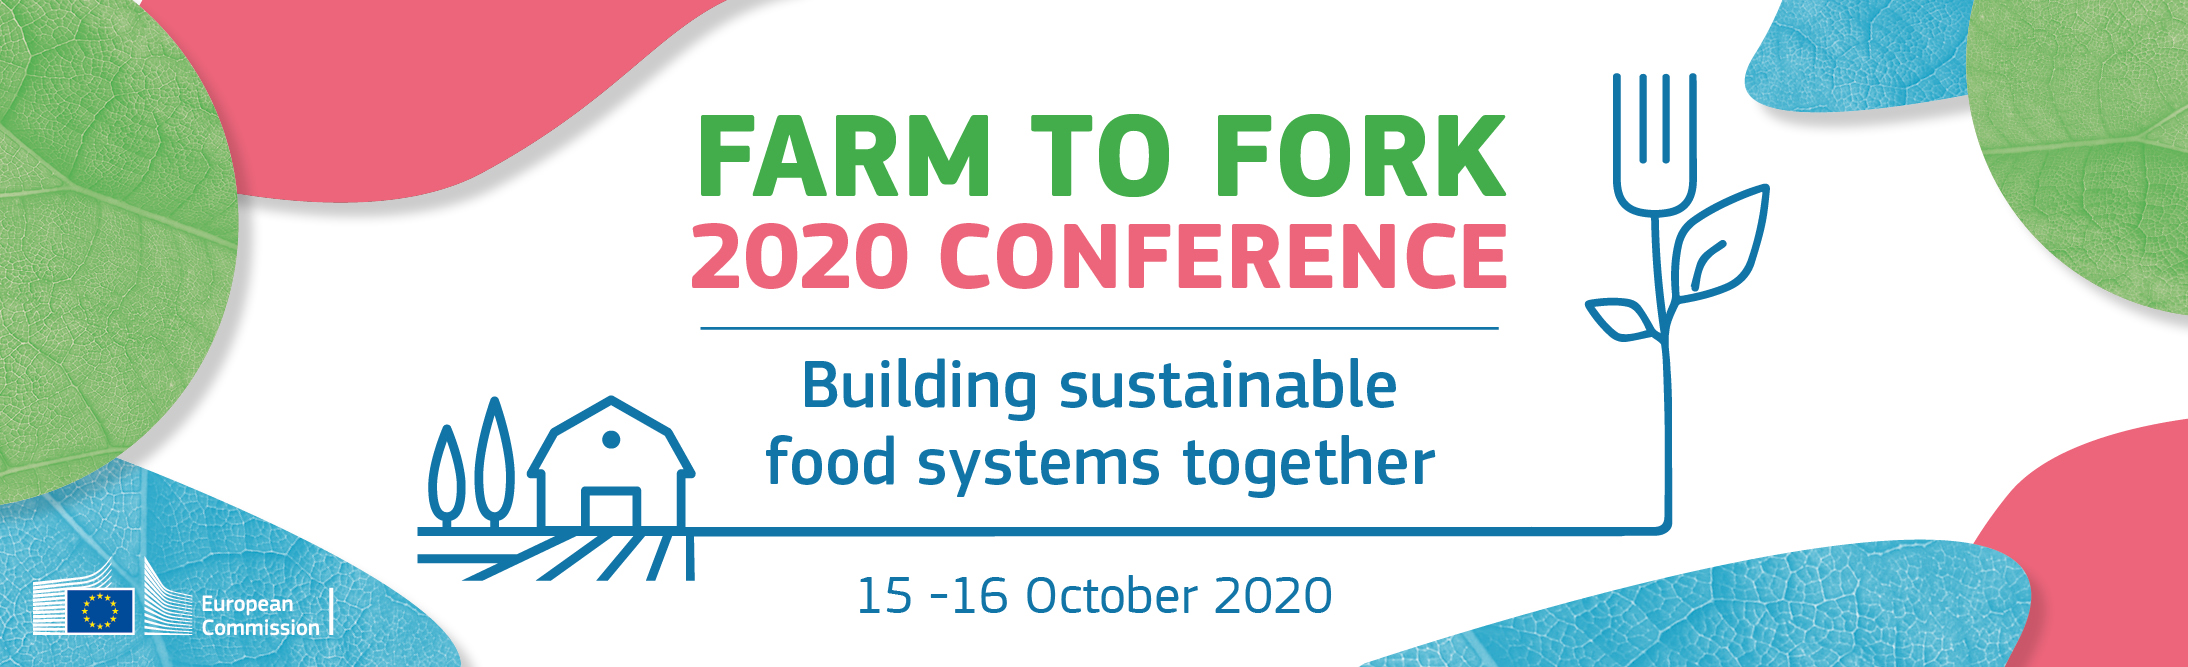 Farm to Fork 2020 virtual conference - Building sustainable food systems together 15 - 16 October 2020